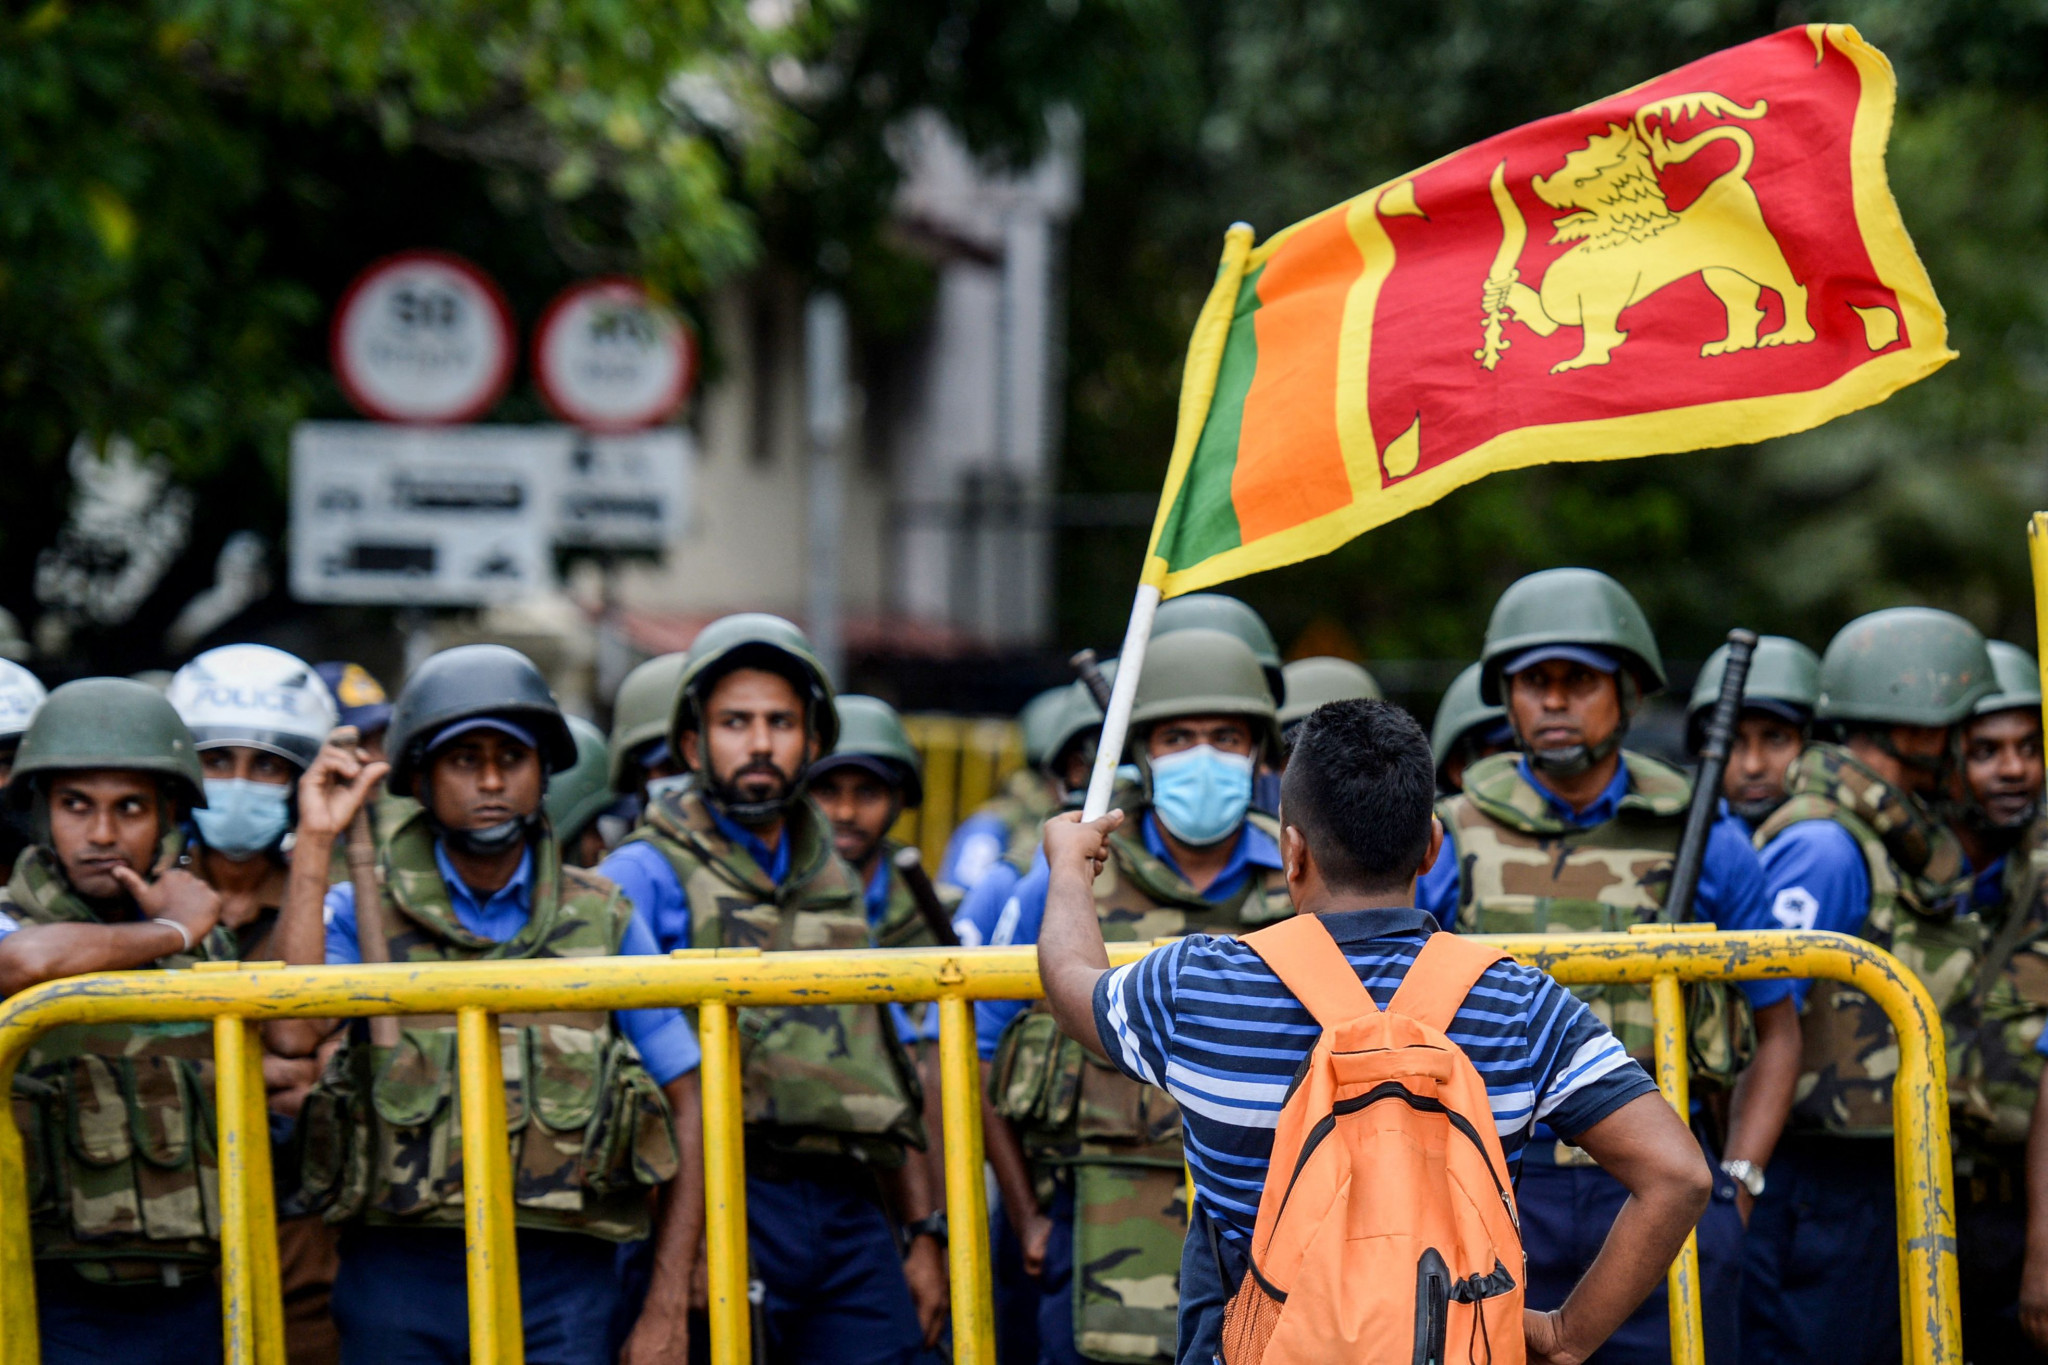 Civil unrest in their home country led to Sri Lankans attempting to flee during the Commonwealth Games ©Getty Images